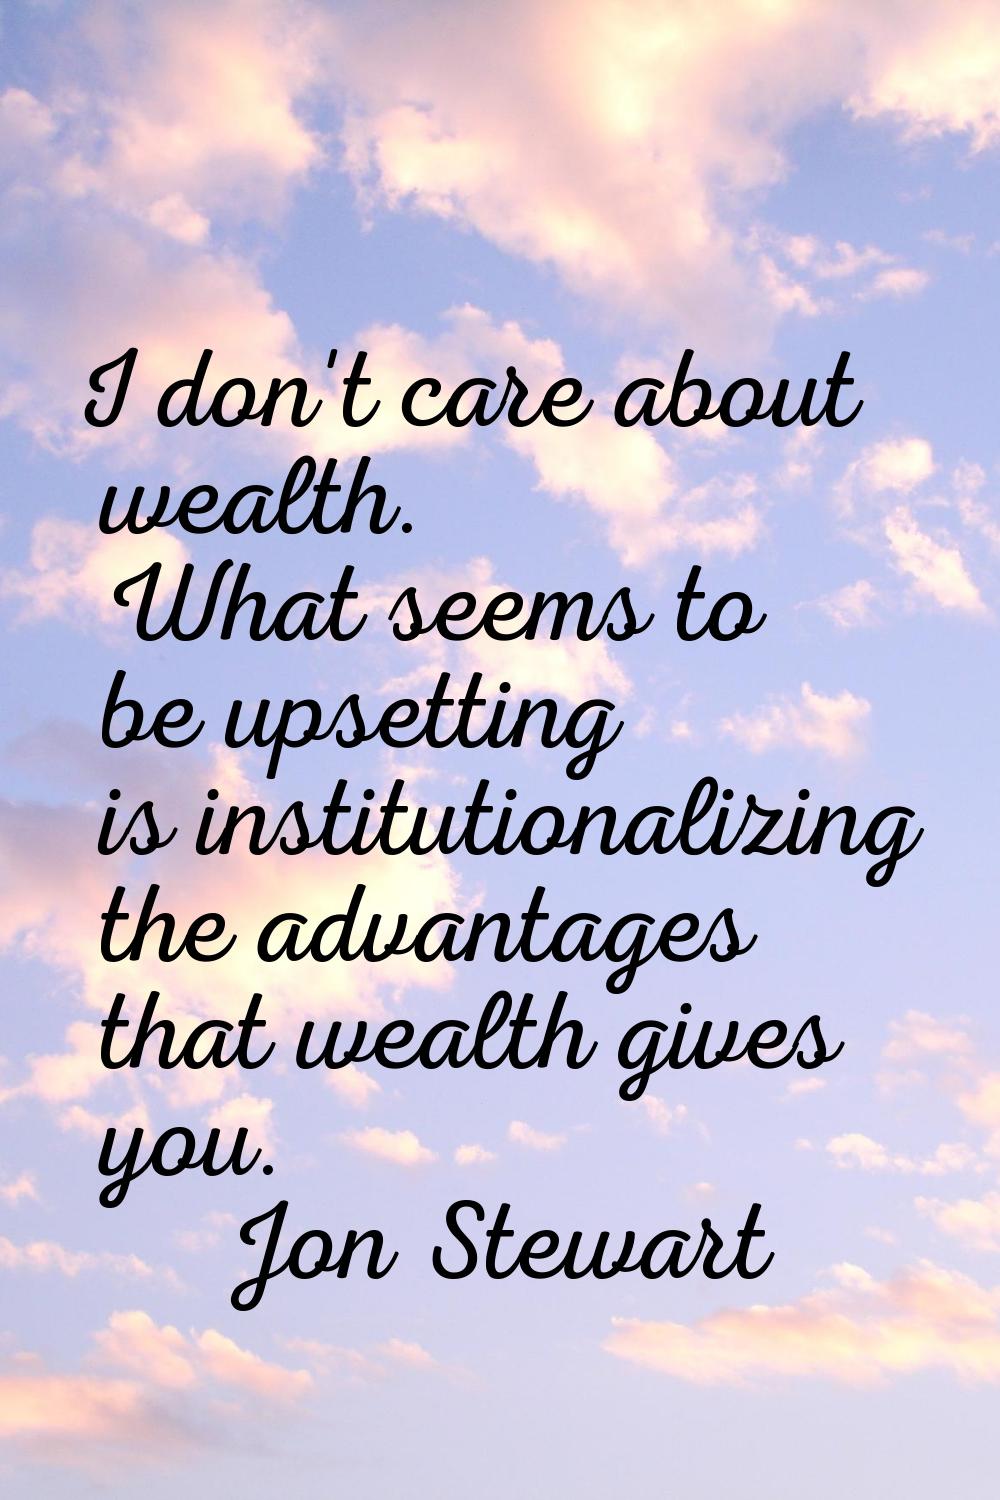 I don't care about wealth. What seems to be upsetting is institutionalizing the advantages that wea